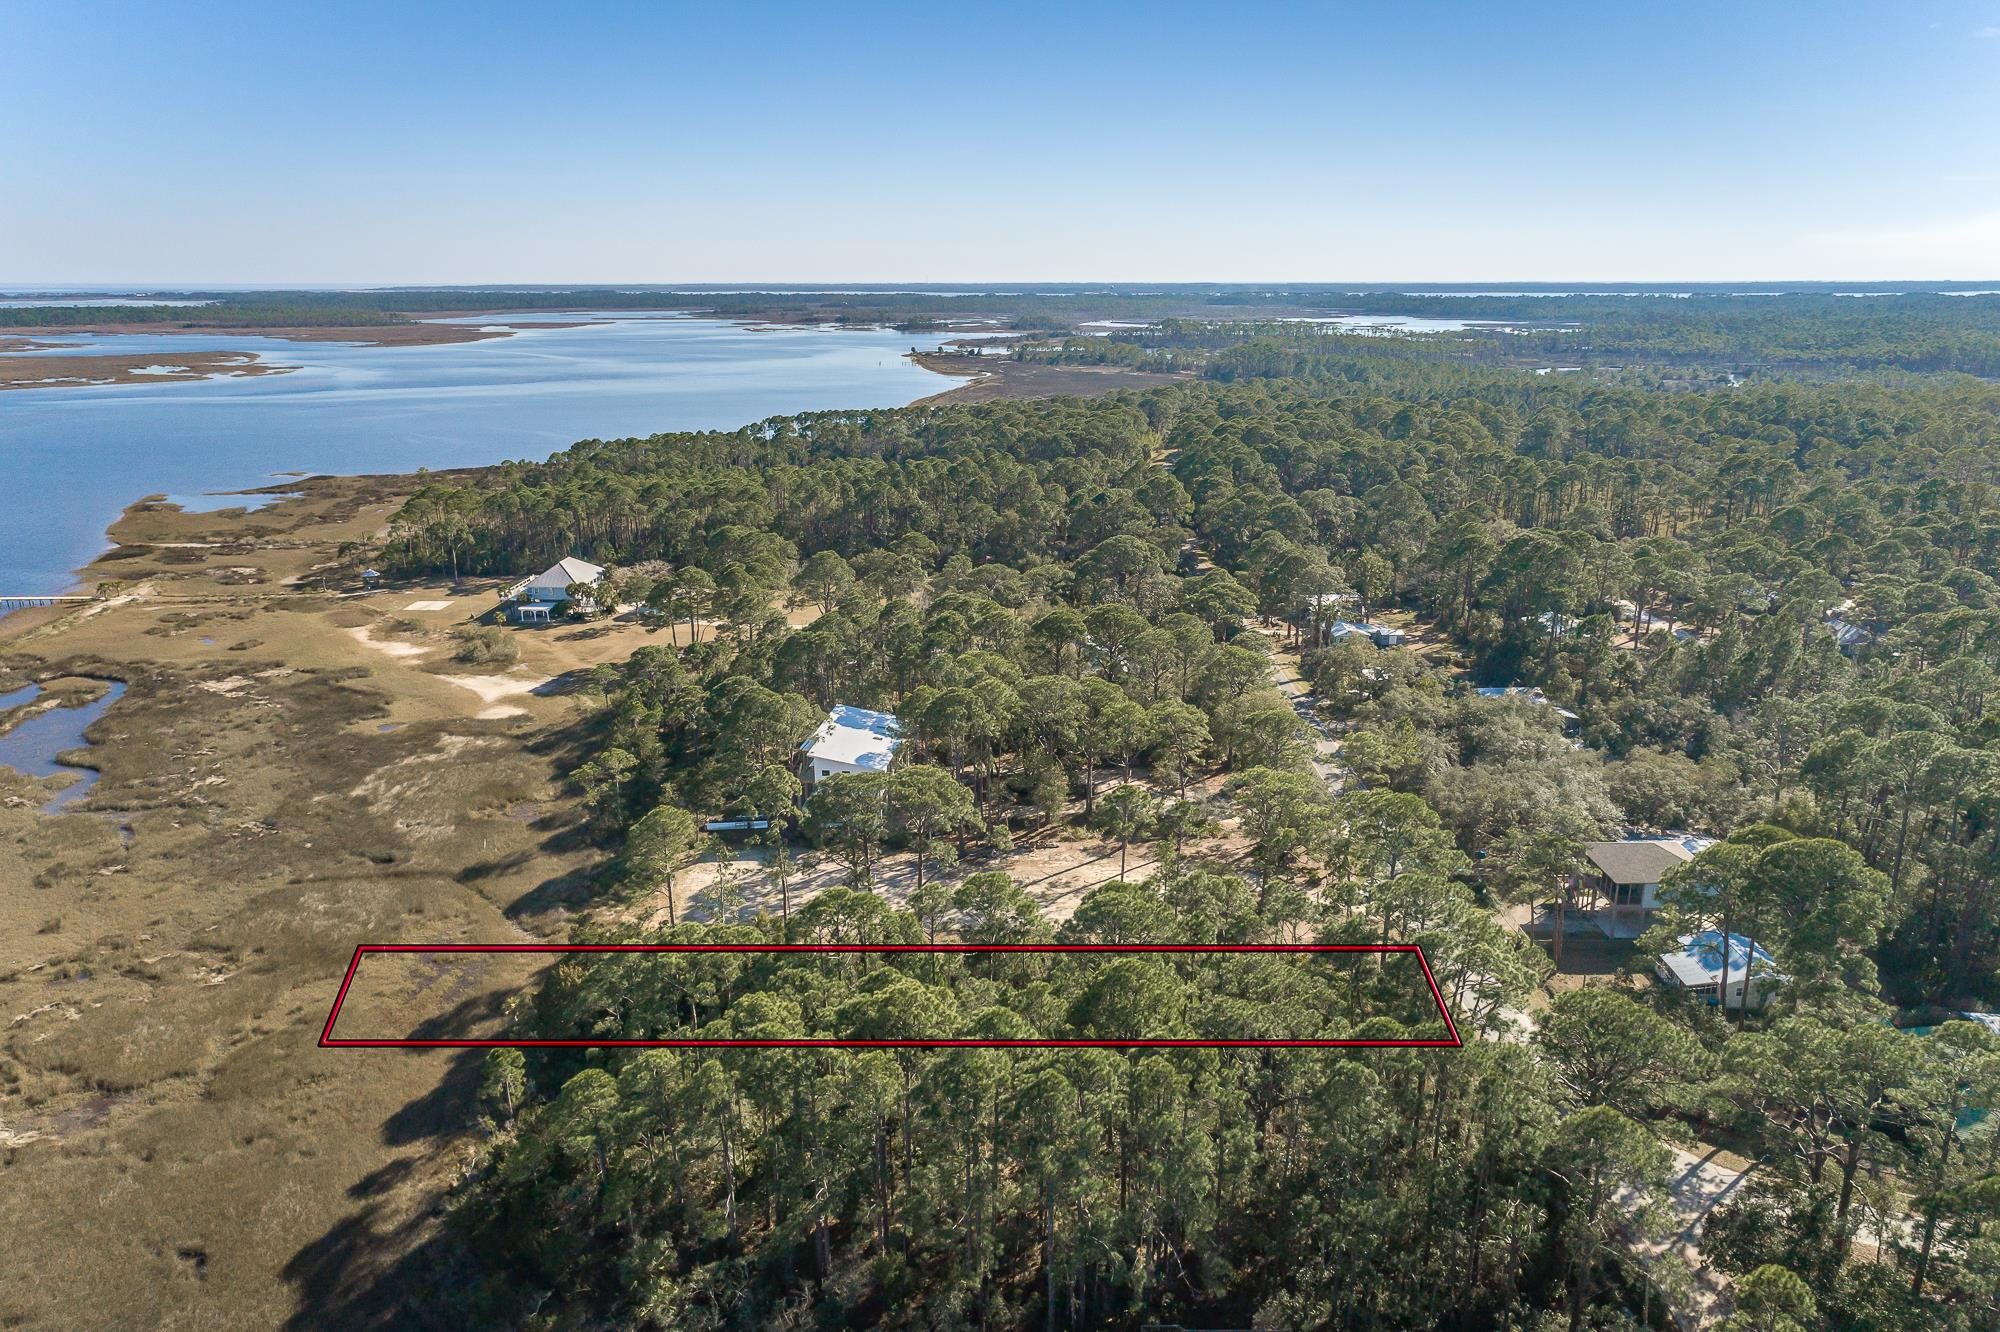 136 Levy Bay,PANACEA,Florida 32346,Lots and land,Levy Bay,368402